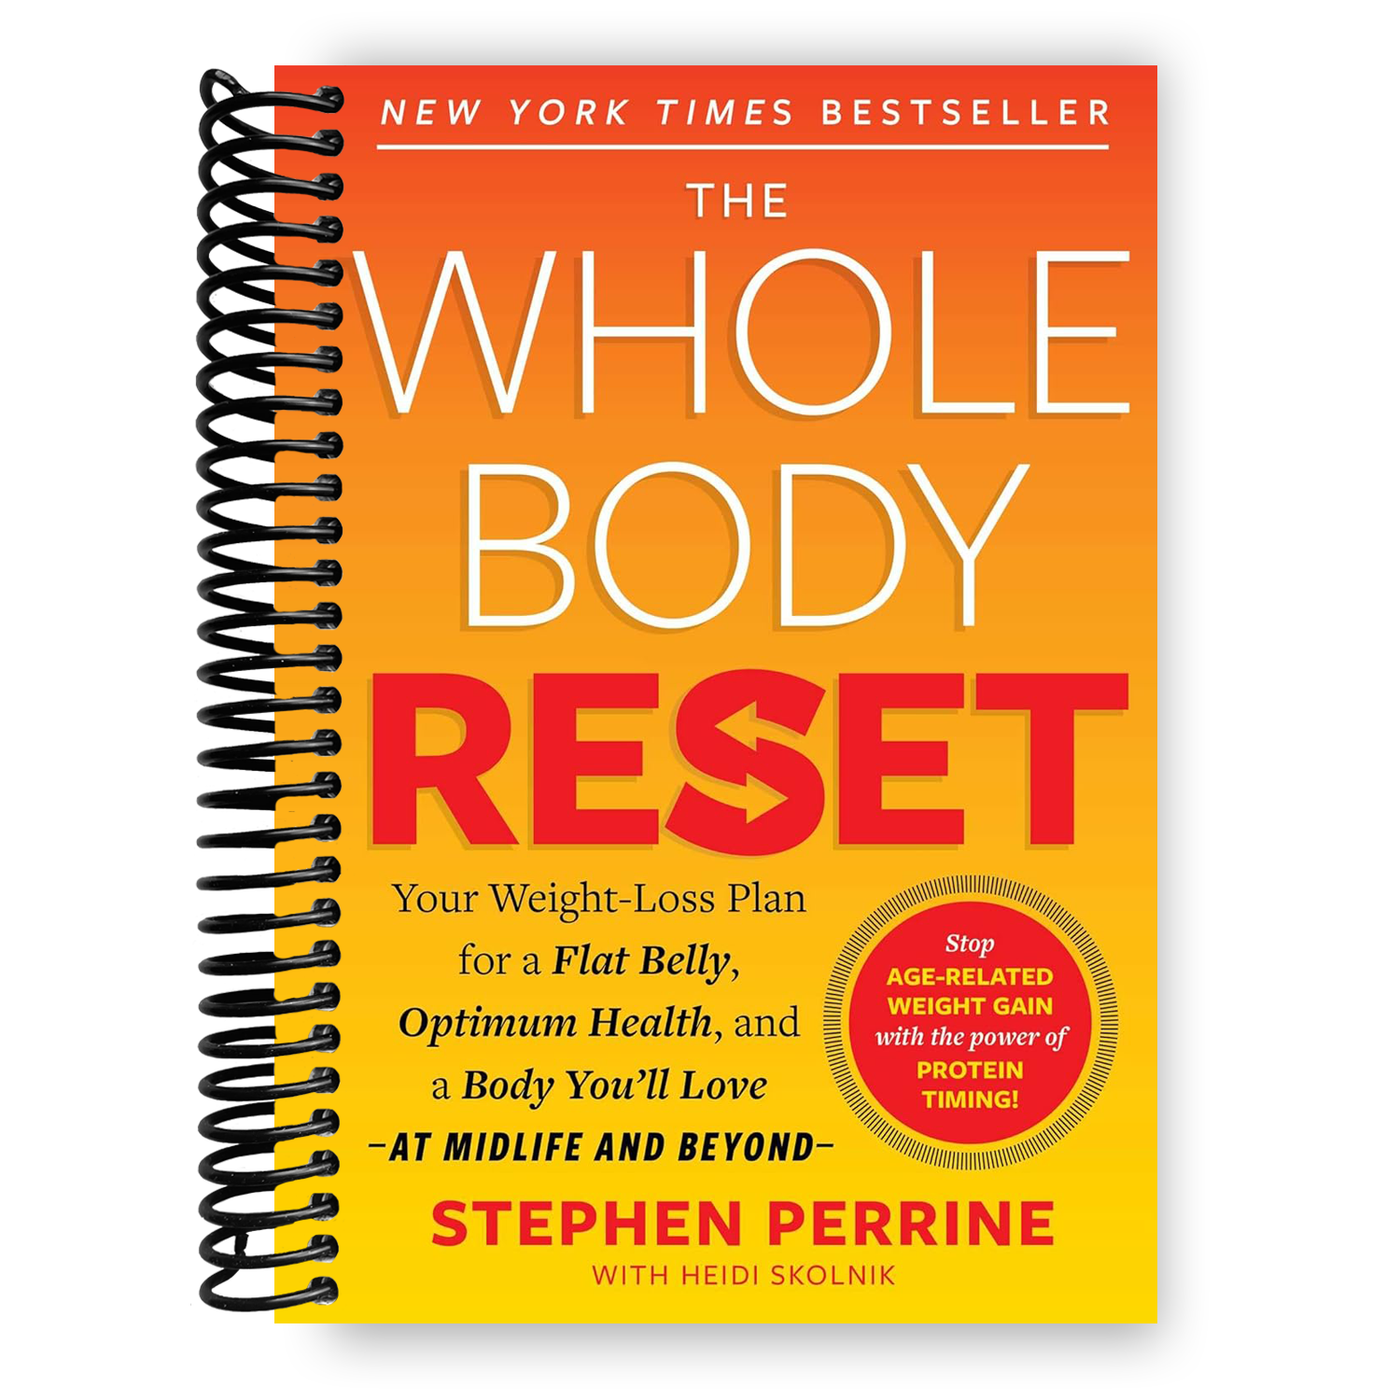 The Whole Body Reset (Spiral Bound)